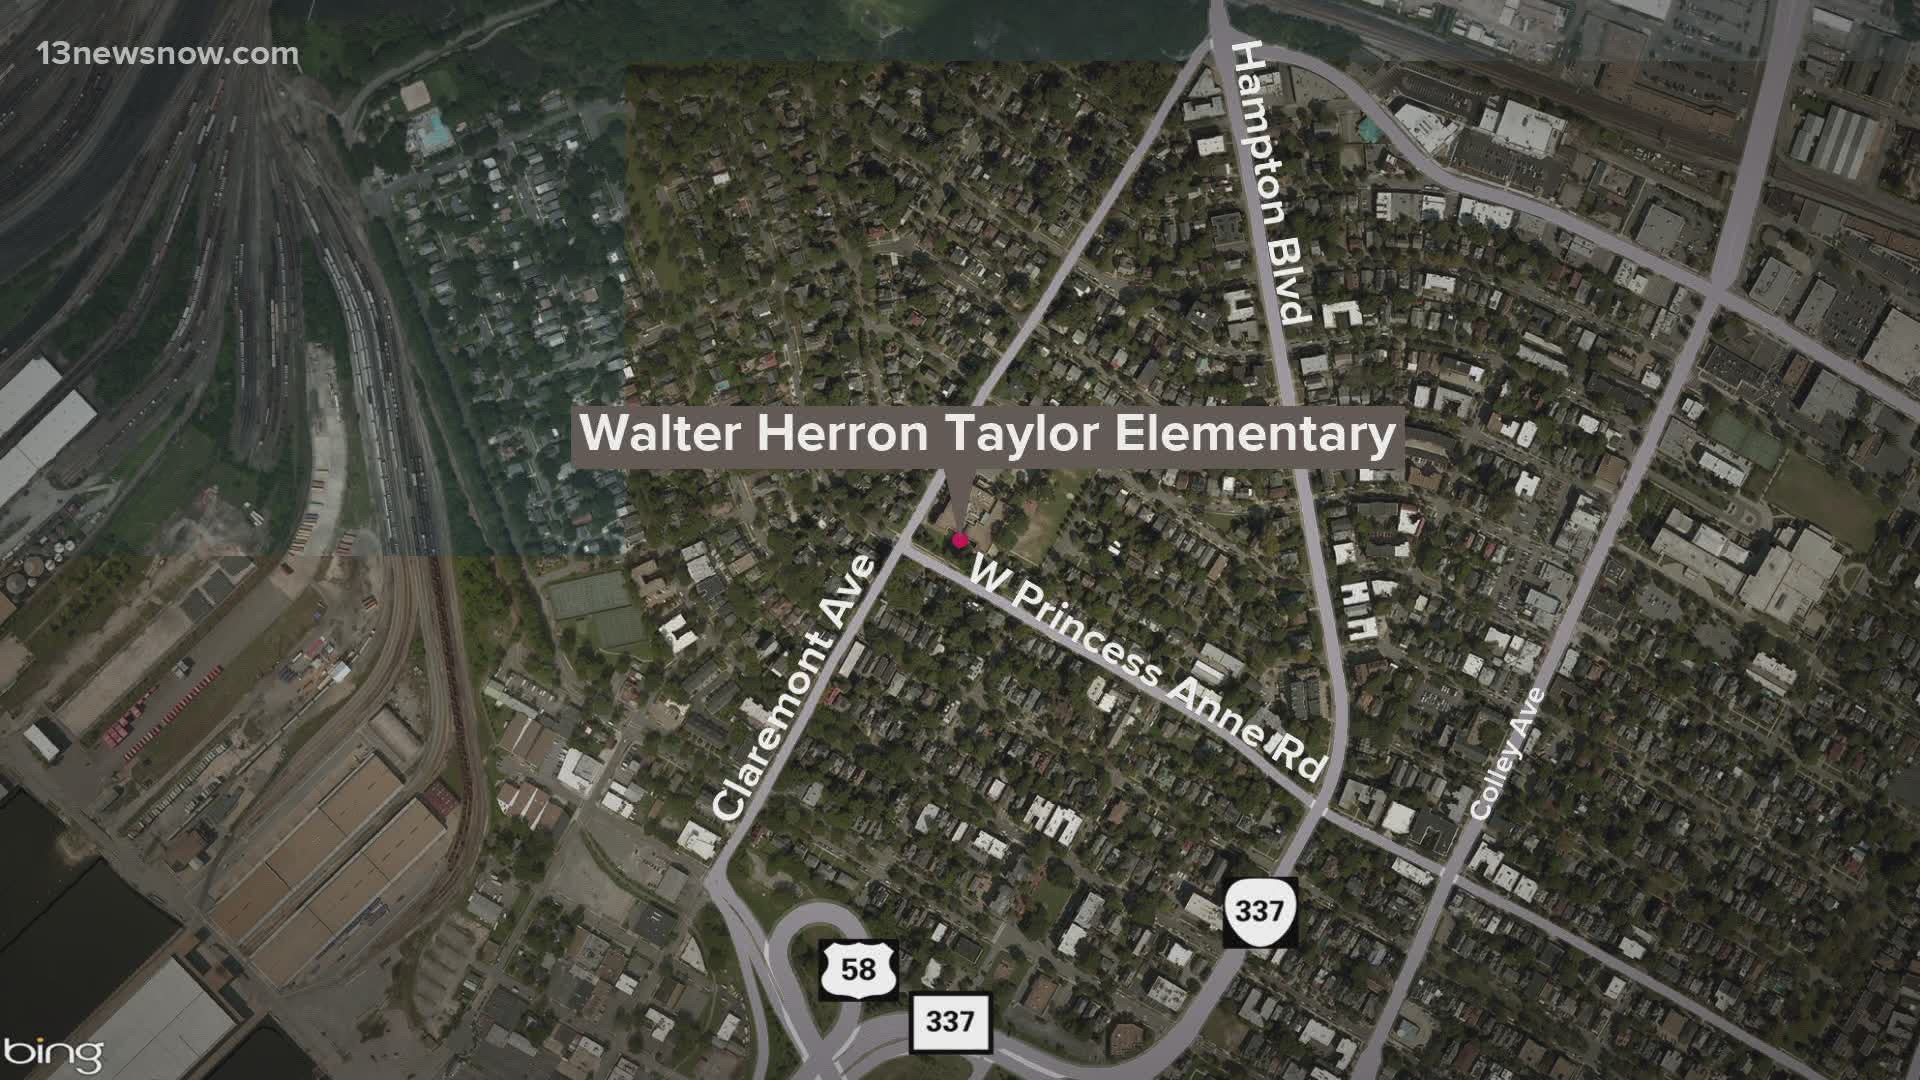 A 63-year-old man was taken into custody after he allegedly threatened to bomb the polling station at Taylor Elementary School in Norfolk on Tuesday.